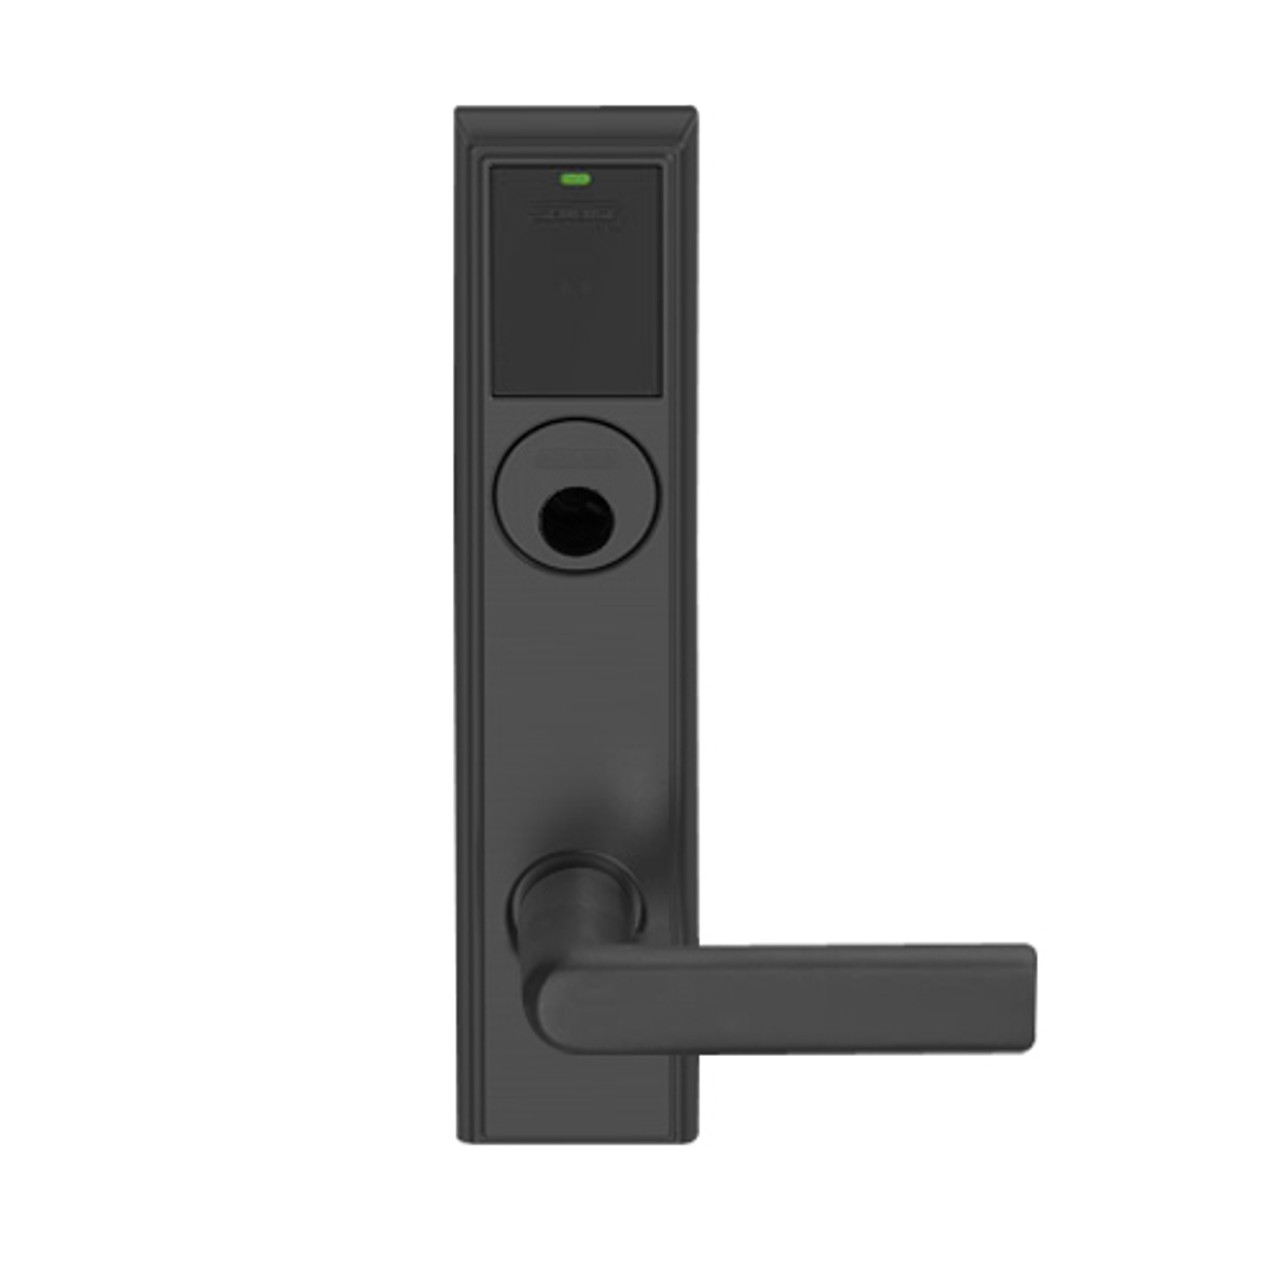 LEMB-ADD-L-01-622 Schlage Less Mortise Cylinder Privacy/Office Wireless Addison Mortise Lock with Push Button, LED and 01 Lever in Matte Black